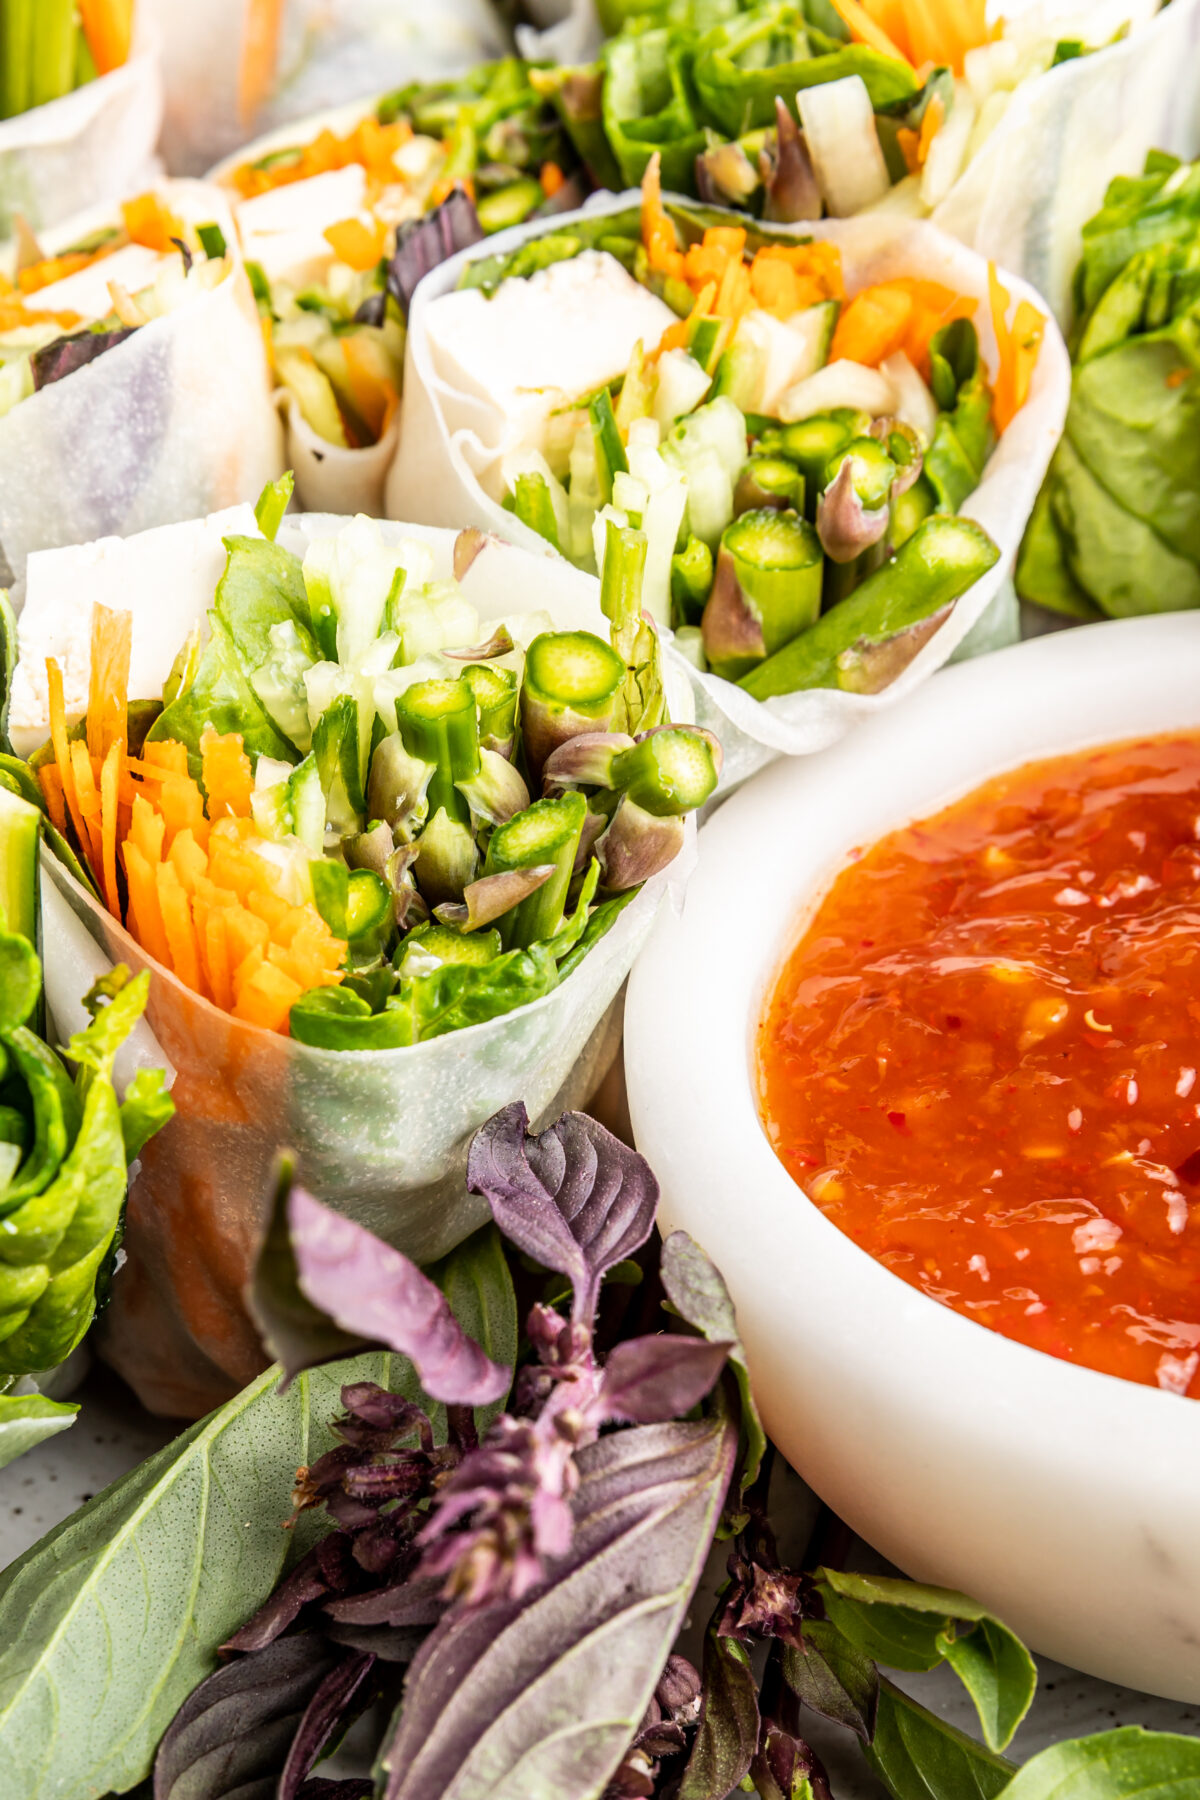 Light and refreshing, these healthy and delicious Thai Basil Zucchini Summer Rolls make the perfect appetizer, snack, or light meal.